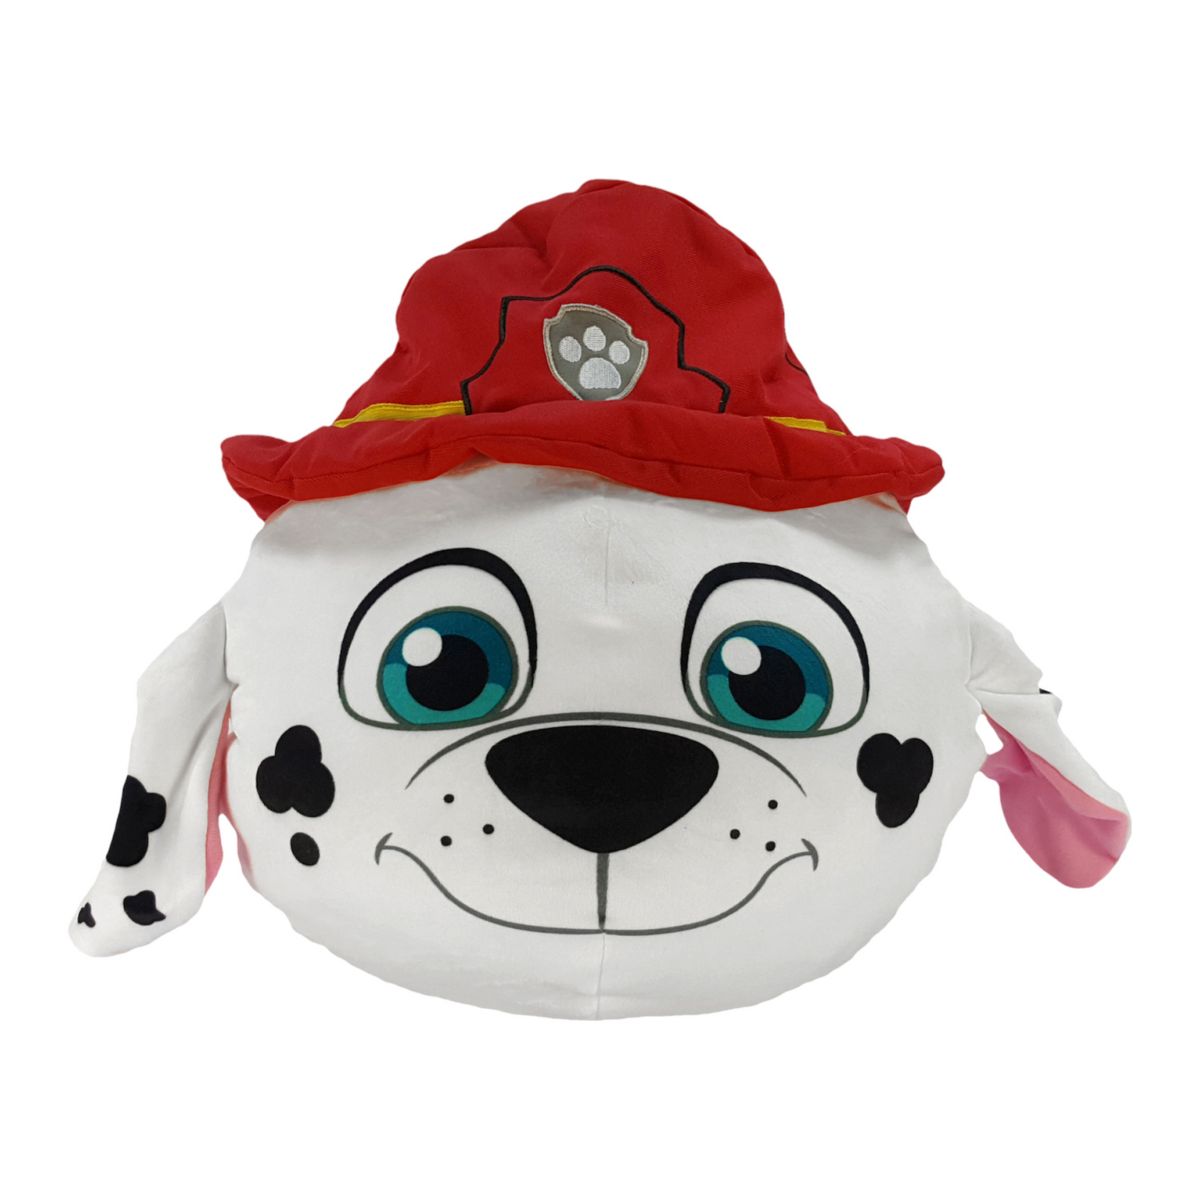 Paw Patrol Marshall Cloud Pillow Licensed Character